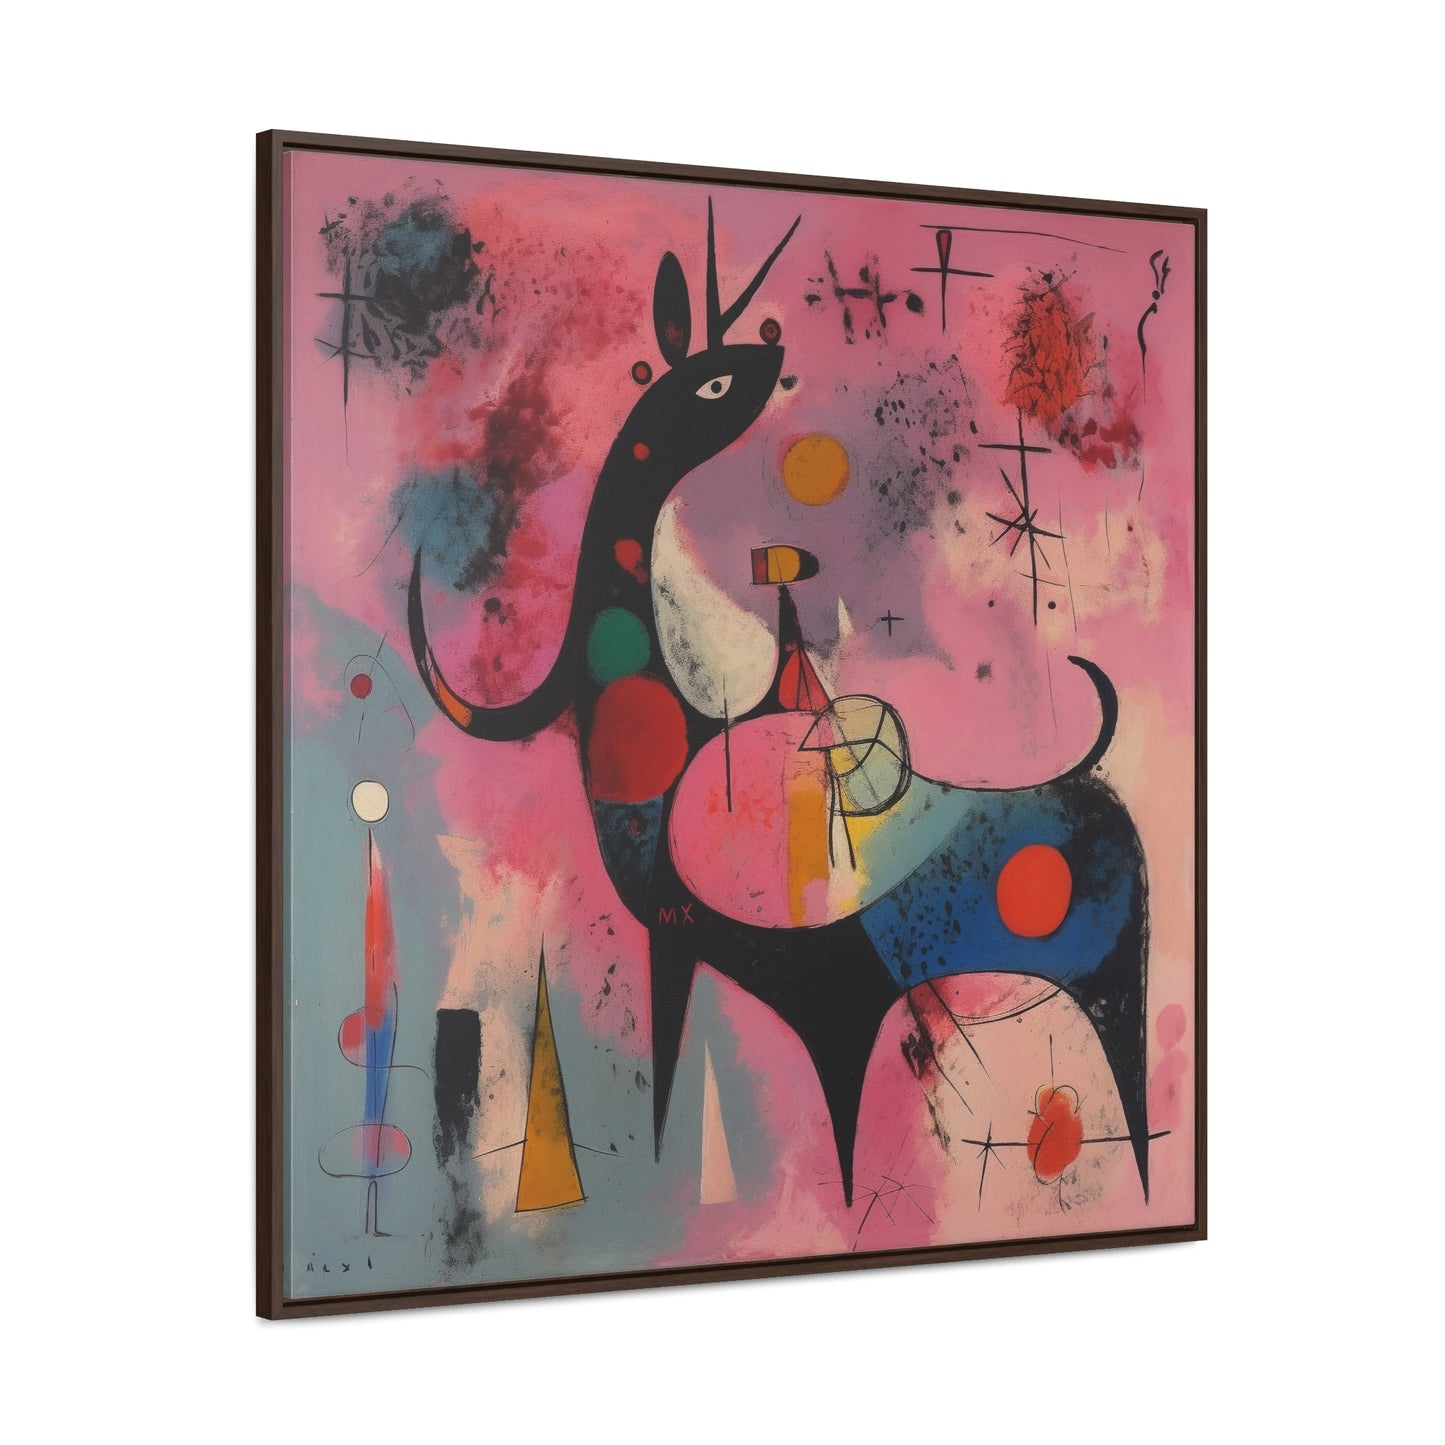 The Dreams of the Child 58, Gallery Canvas Wraps, Square Frame